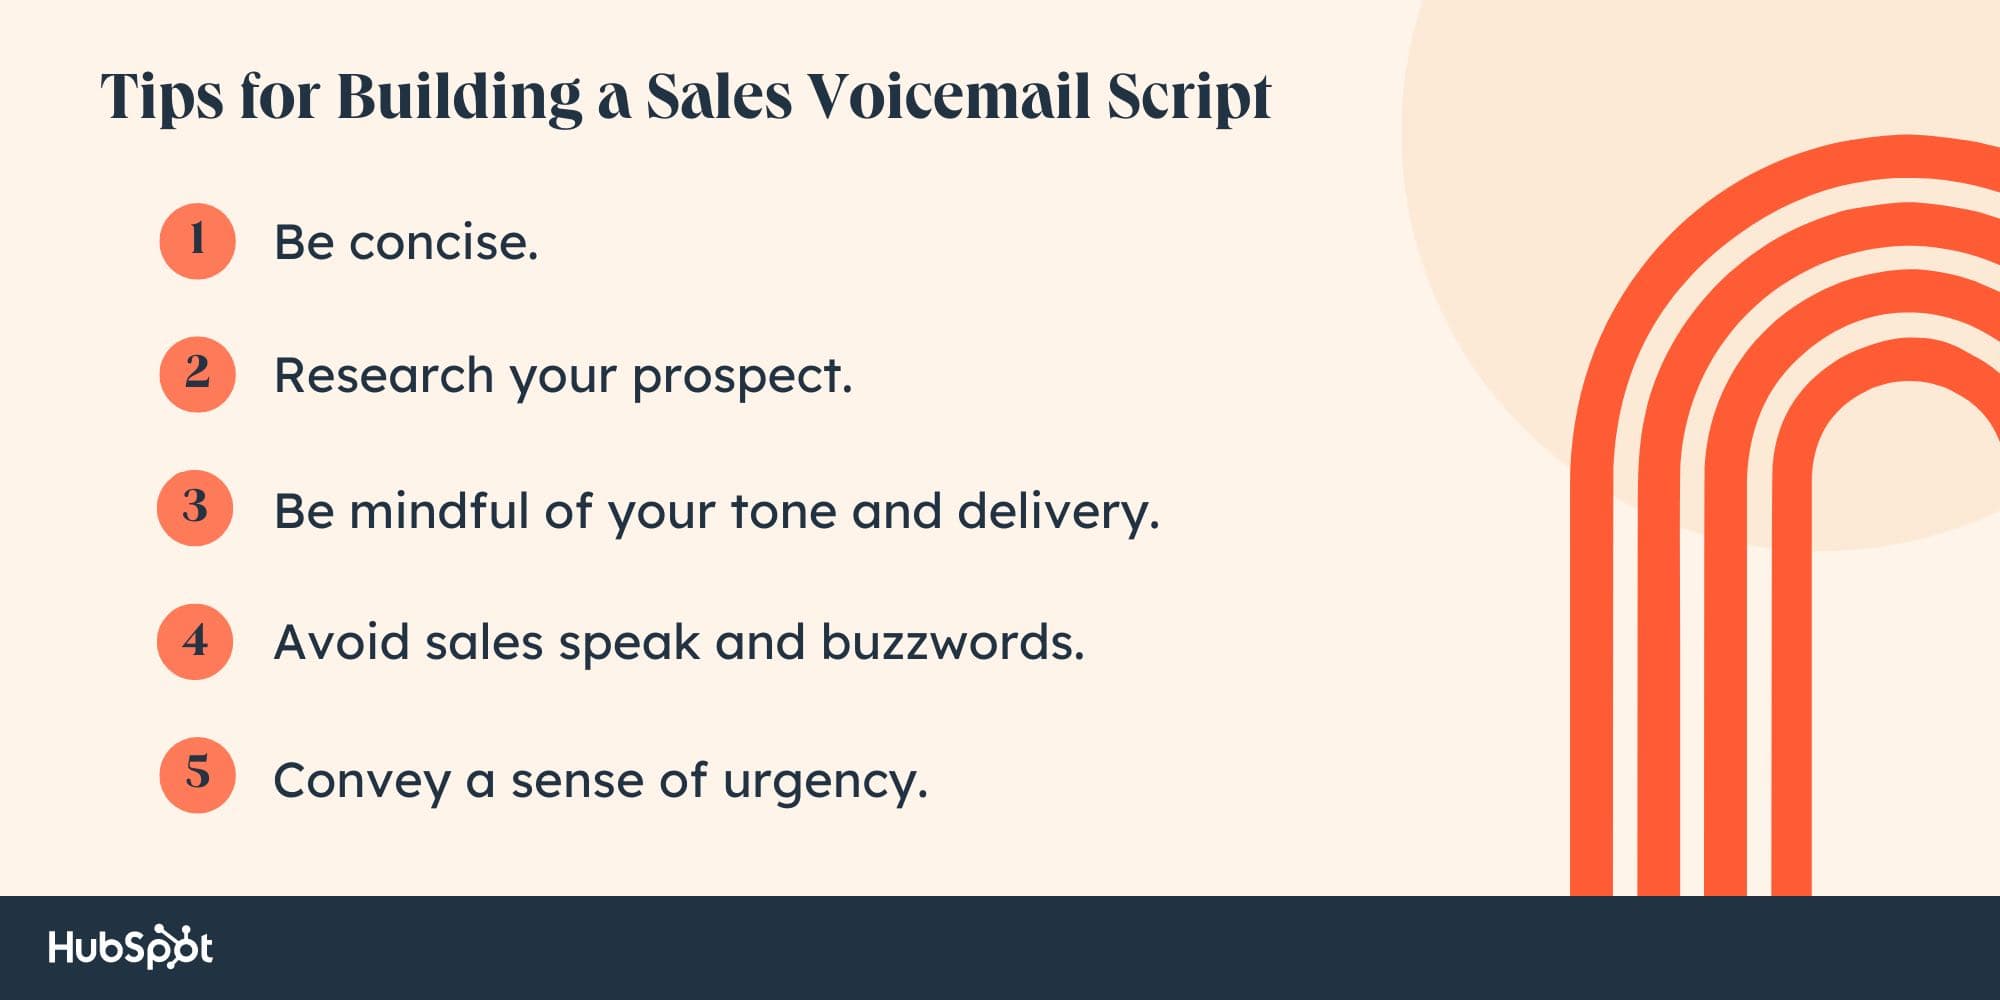 Tips for Building a Sales Voicemail Script. Be concise. Convey a sense of urgency. Research your prospect. Be mindful of your tone and delivery. Avoid sales speak and buzzwords.